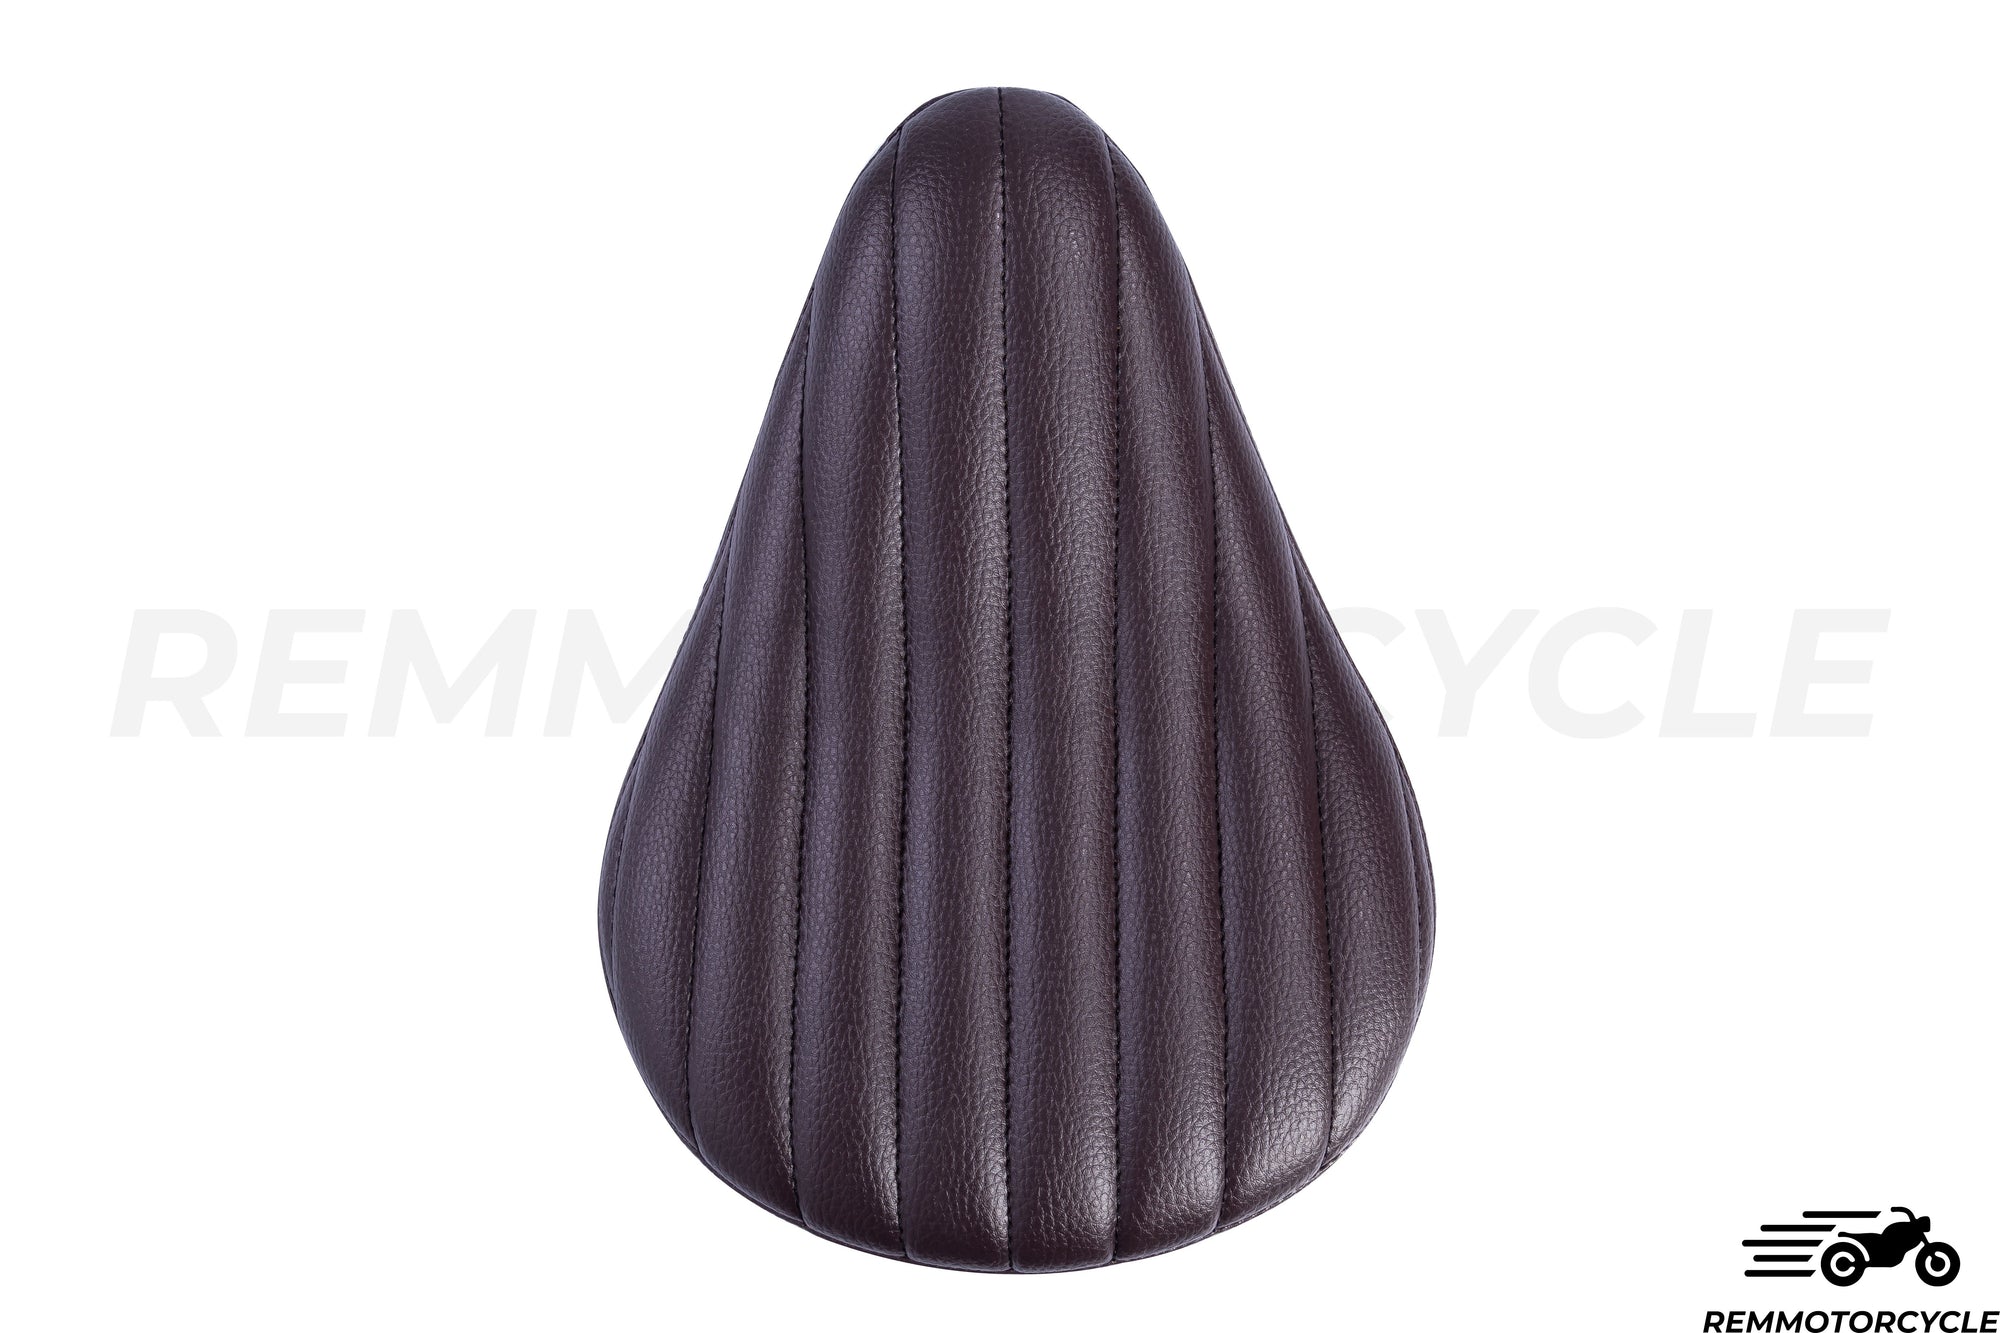 Selle Bobber Marron - Coutures verticales